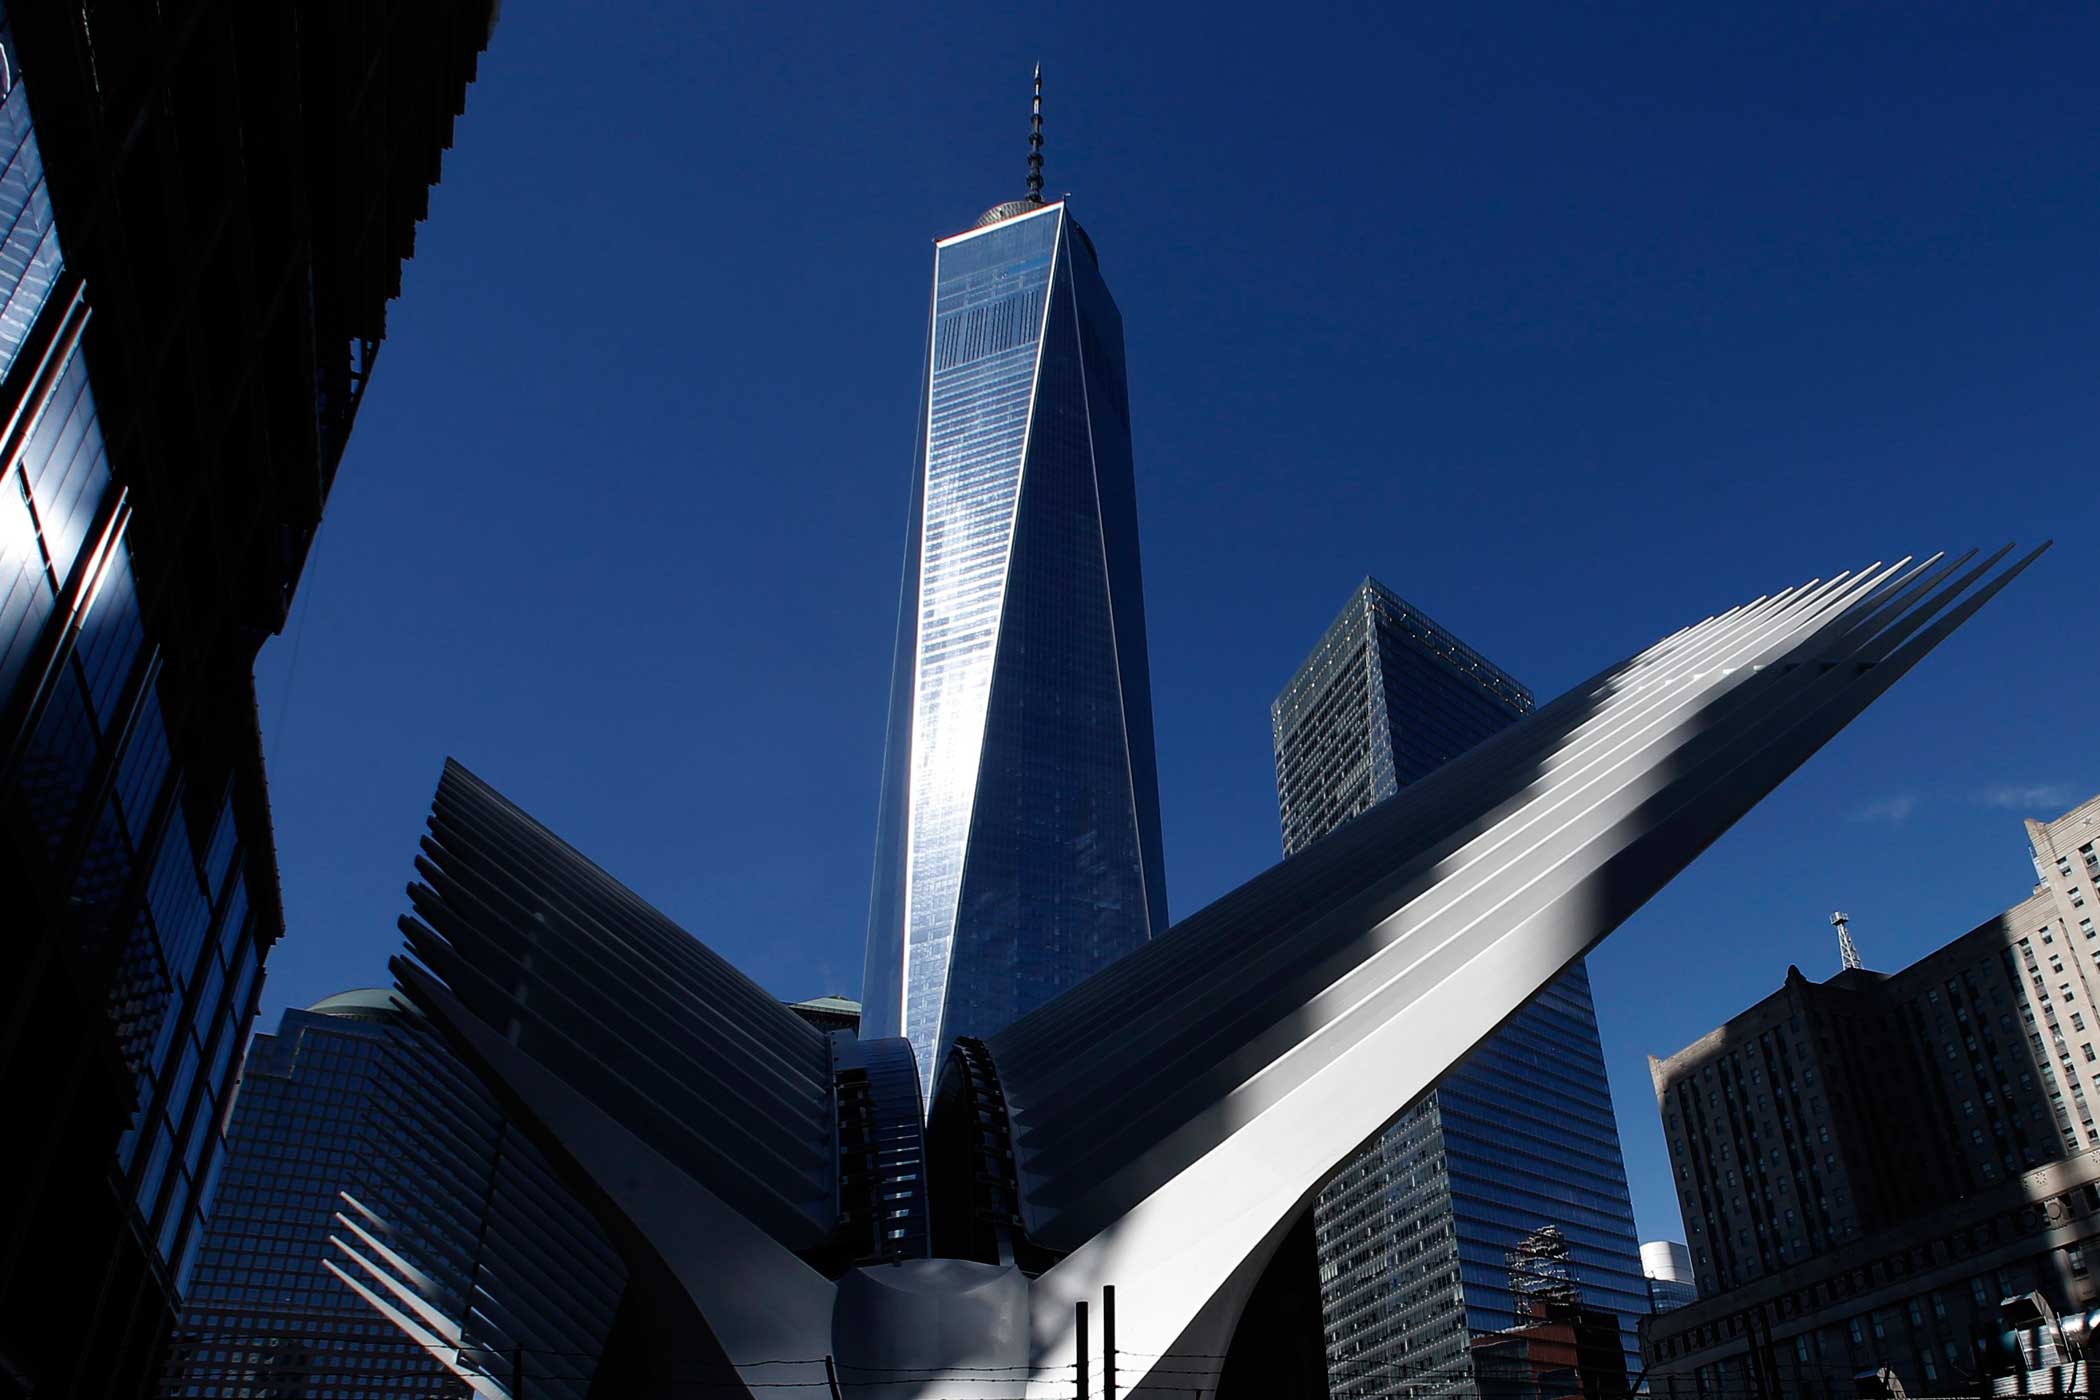 Part of the Oculus structure of the World Trade Center Transportation Hub is pictured next to the One World Trade Center tower in the Manhattan borough of New York